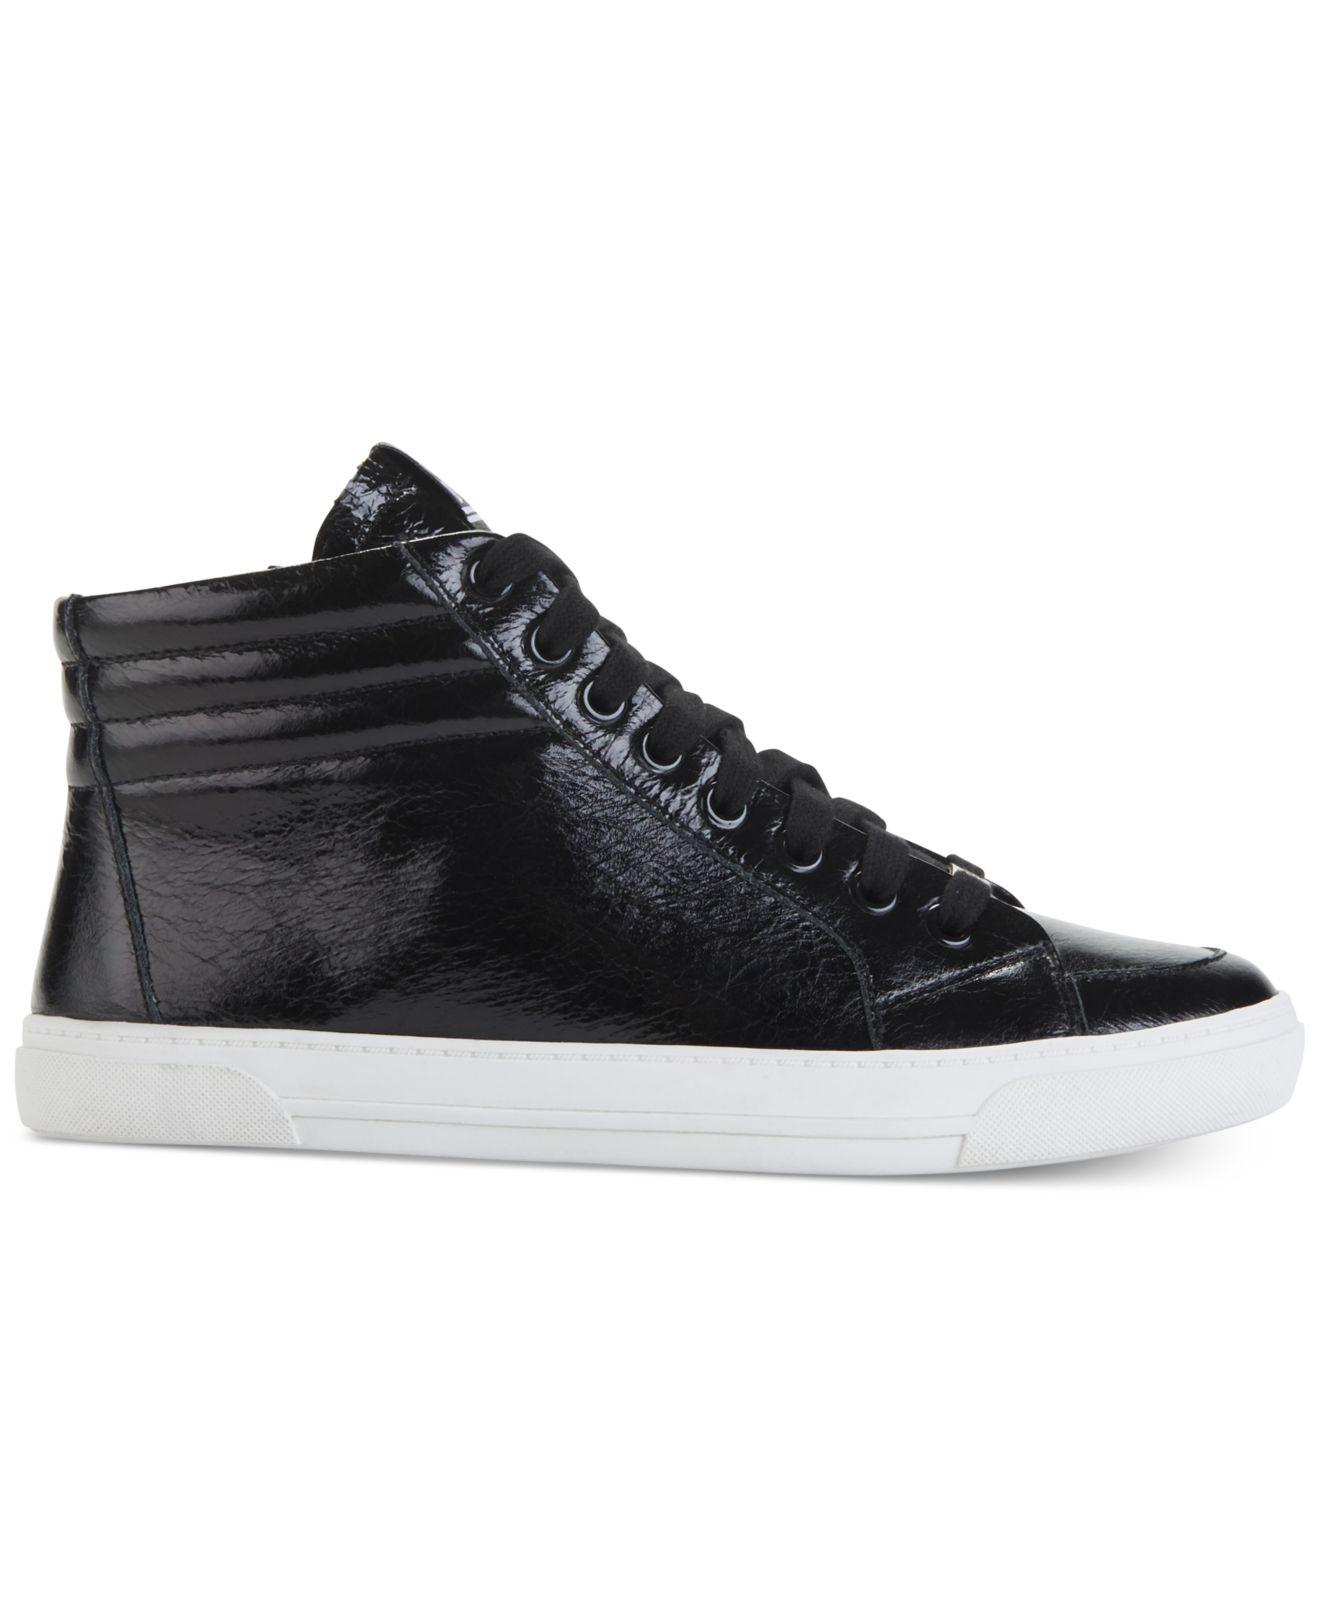 DKNY Womens Anni Leather Low Top Lace Up Fashion Sneakers, Black, Size ...